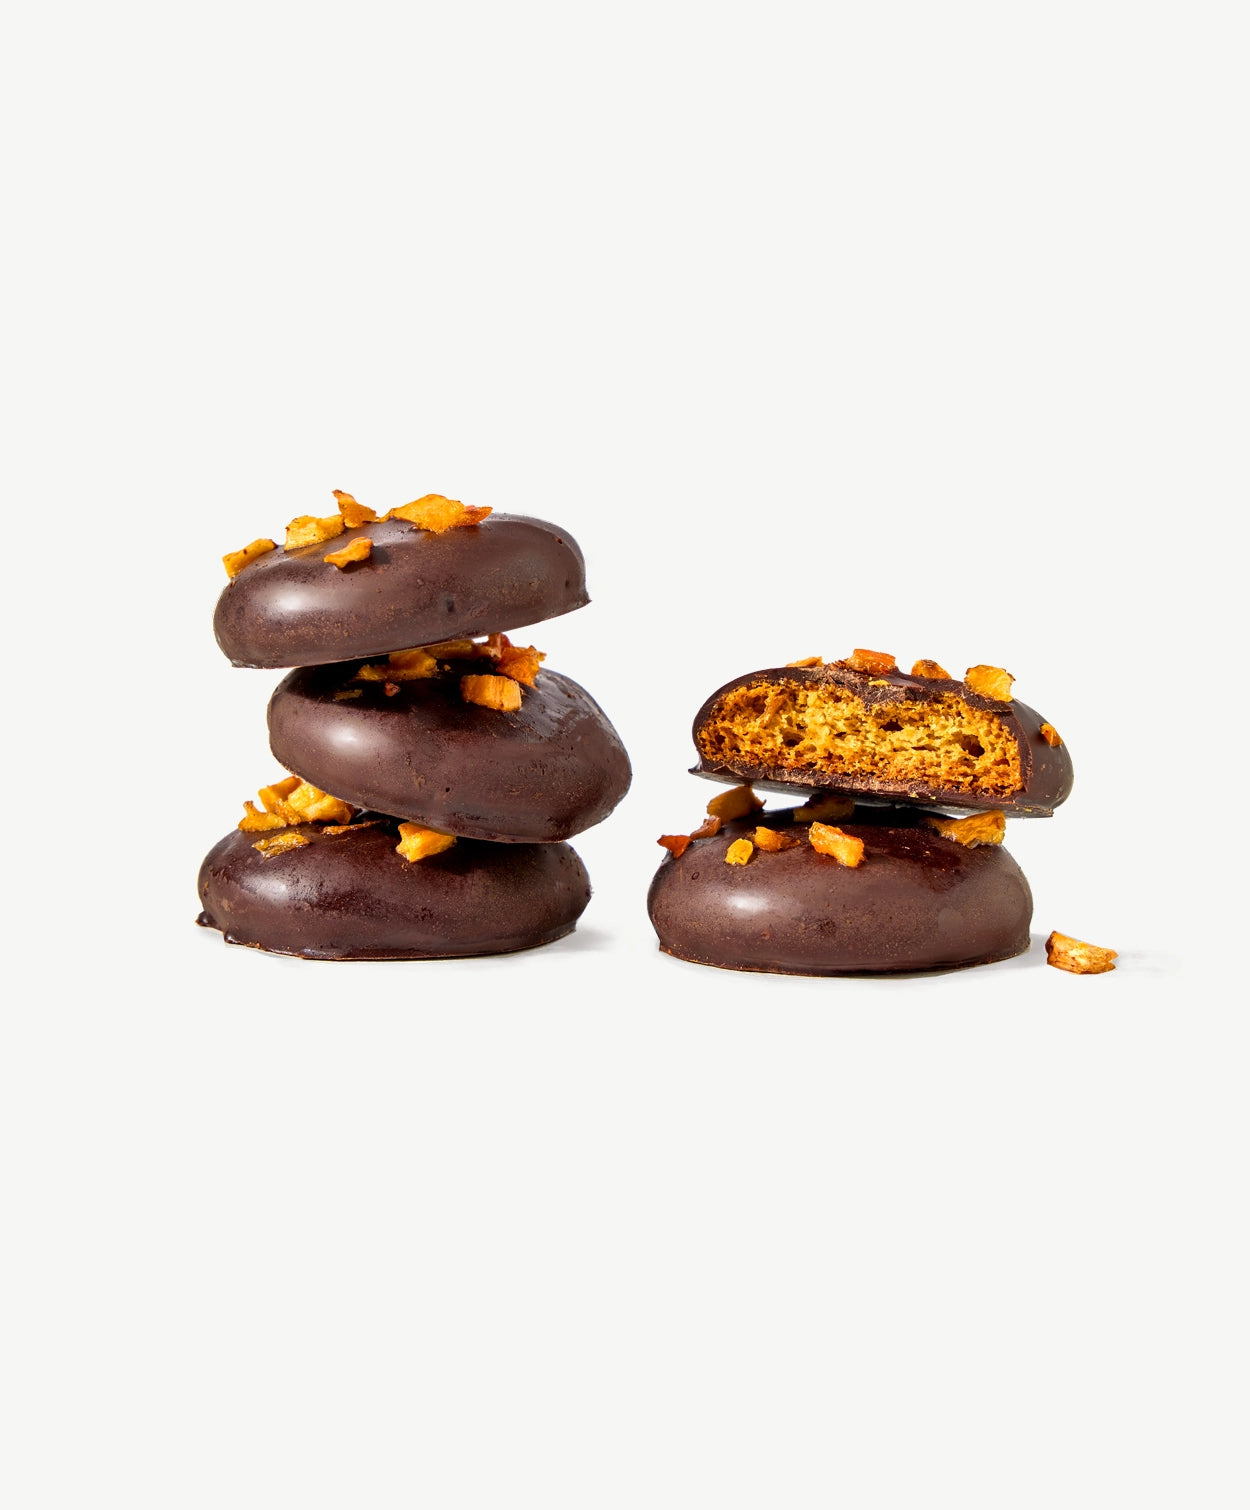 Two small stacks of Vosges Chocolate Dipped Cookies, one cut in half revealing a golden brown cookie adorned with dried persimmon on a grey background.